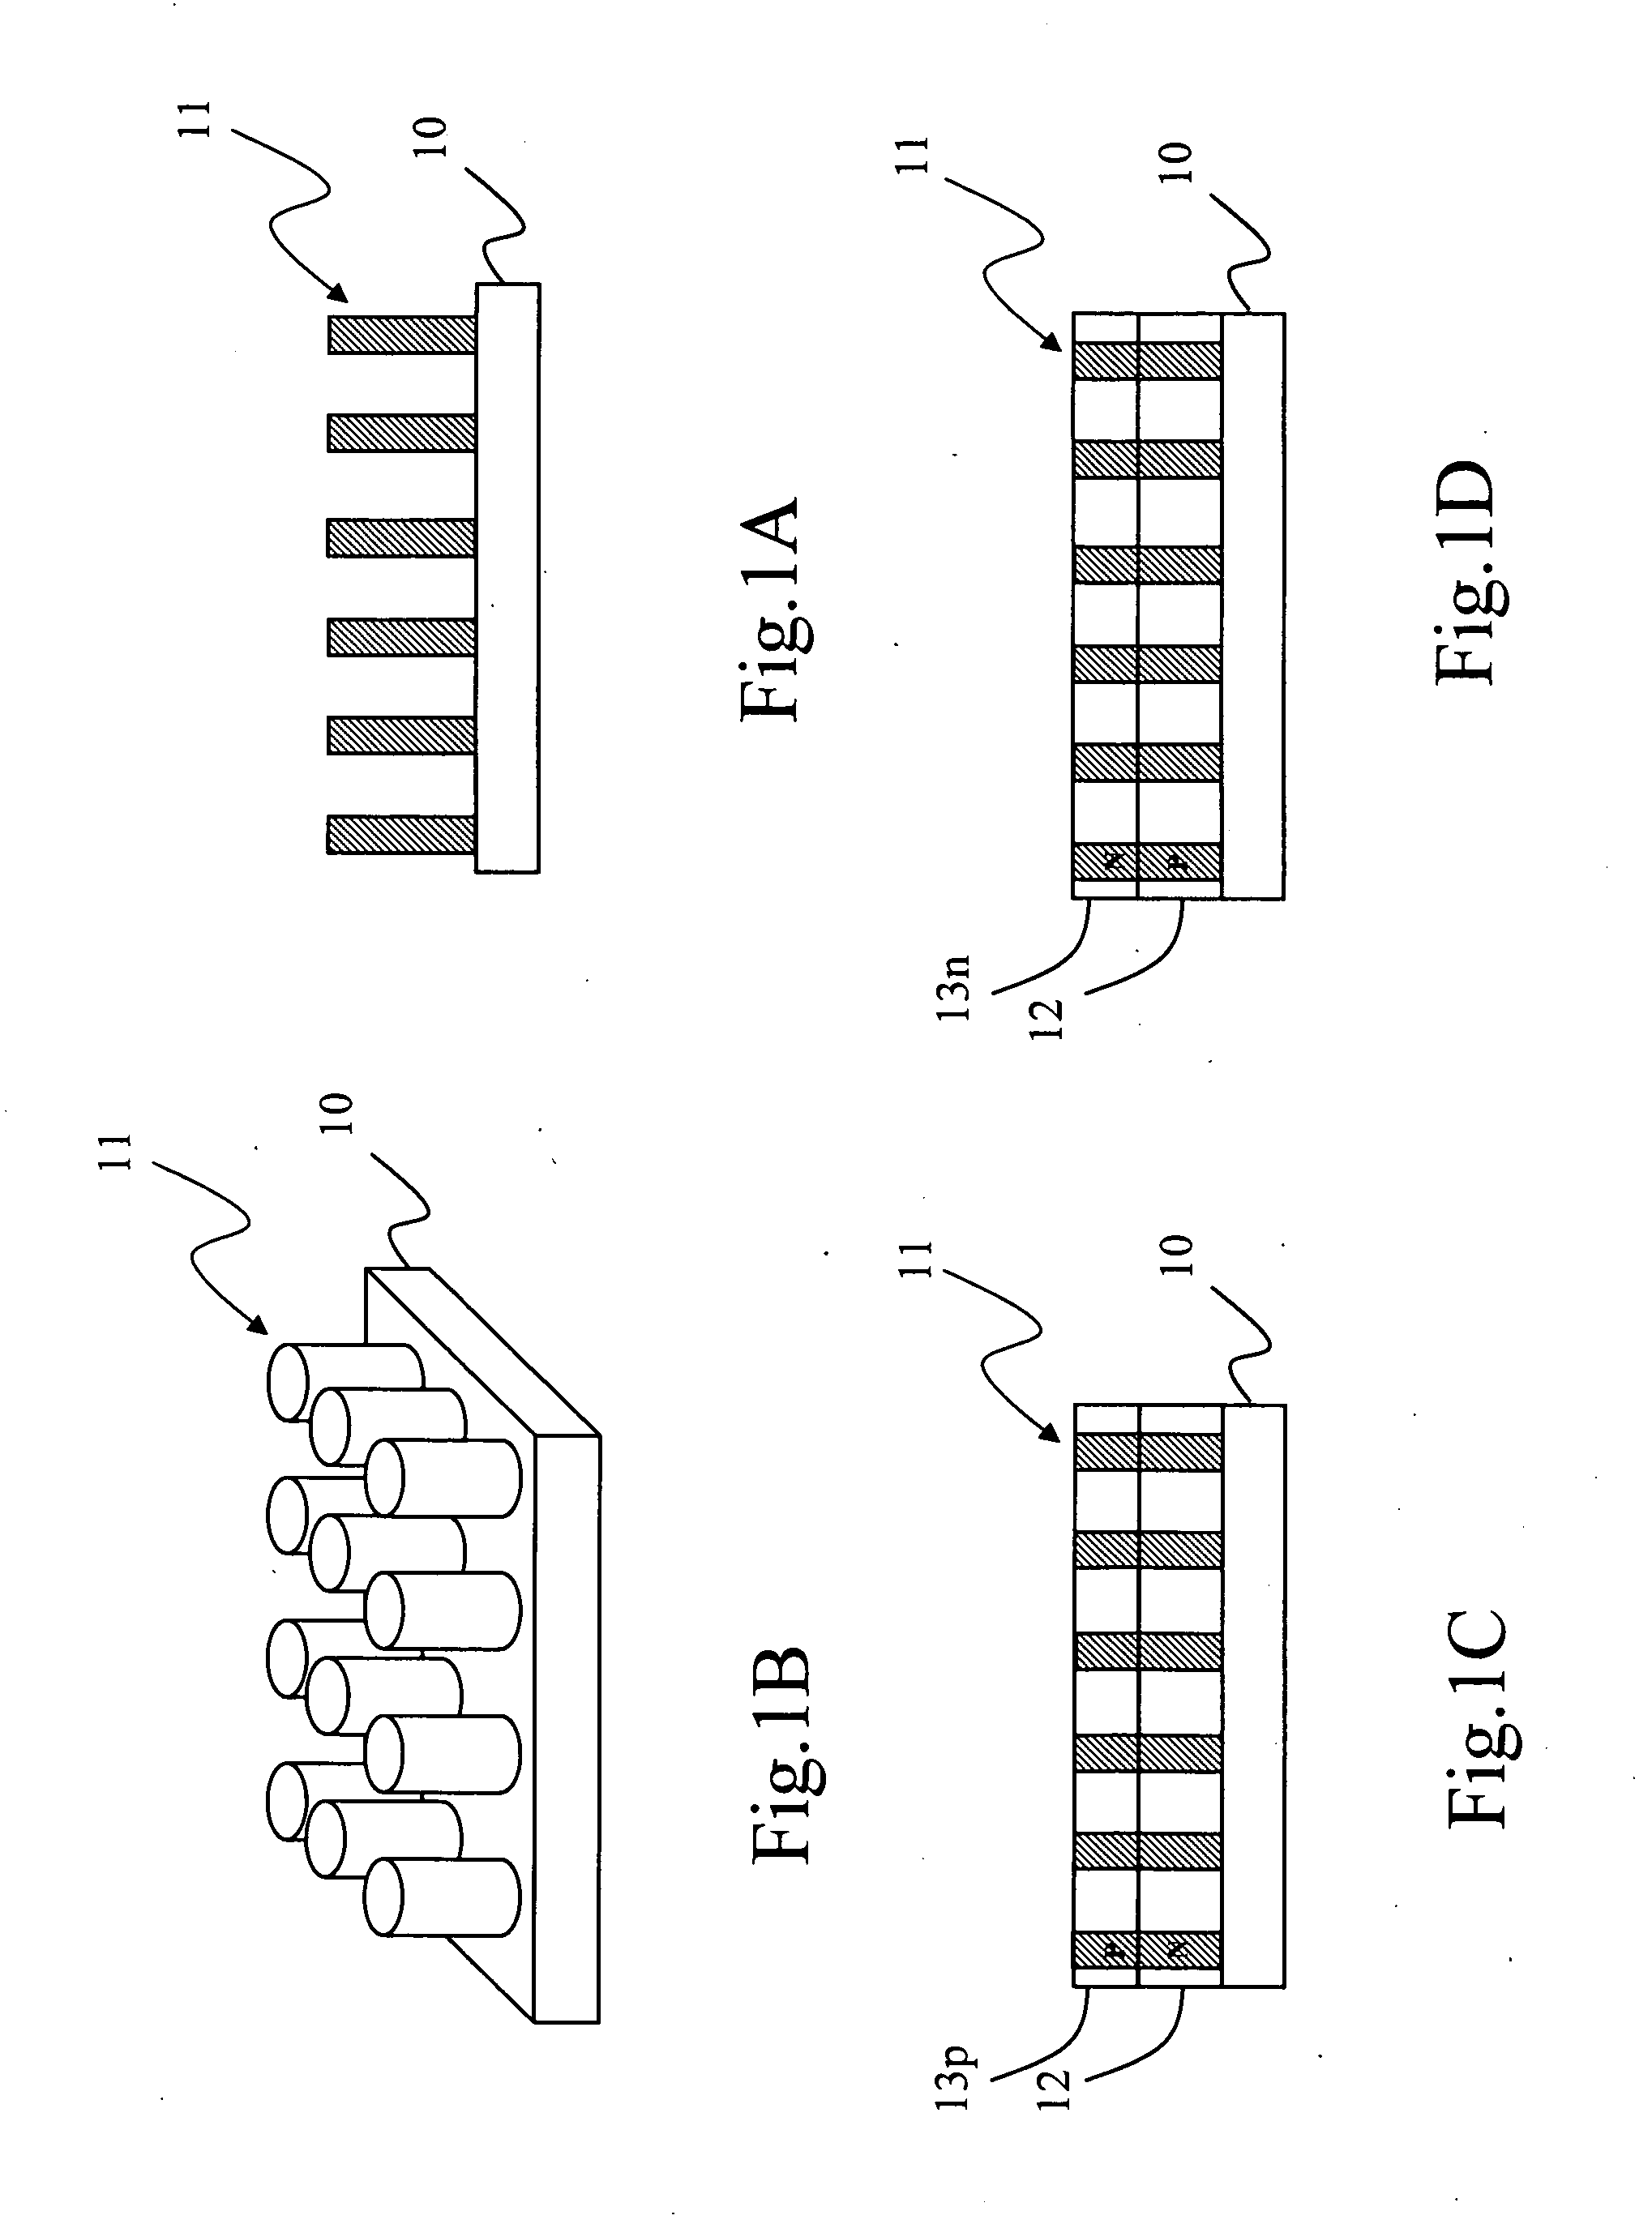 Micro/nanostructure PN junction diode array thin-film solar cell and method for fabricating the same